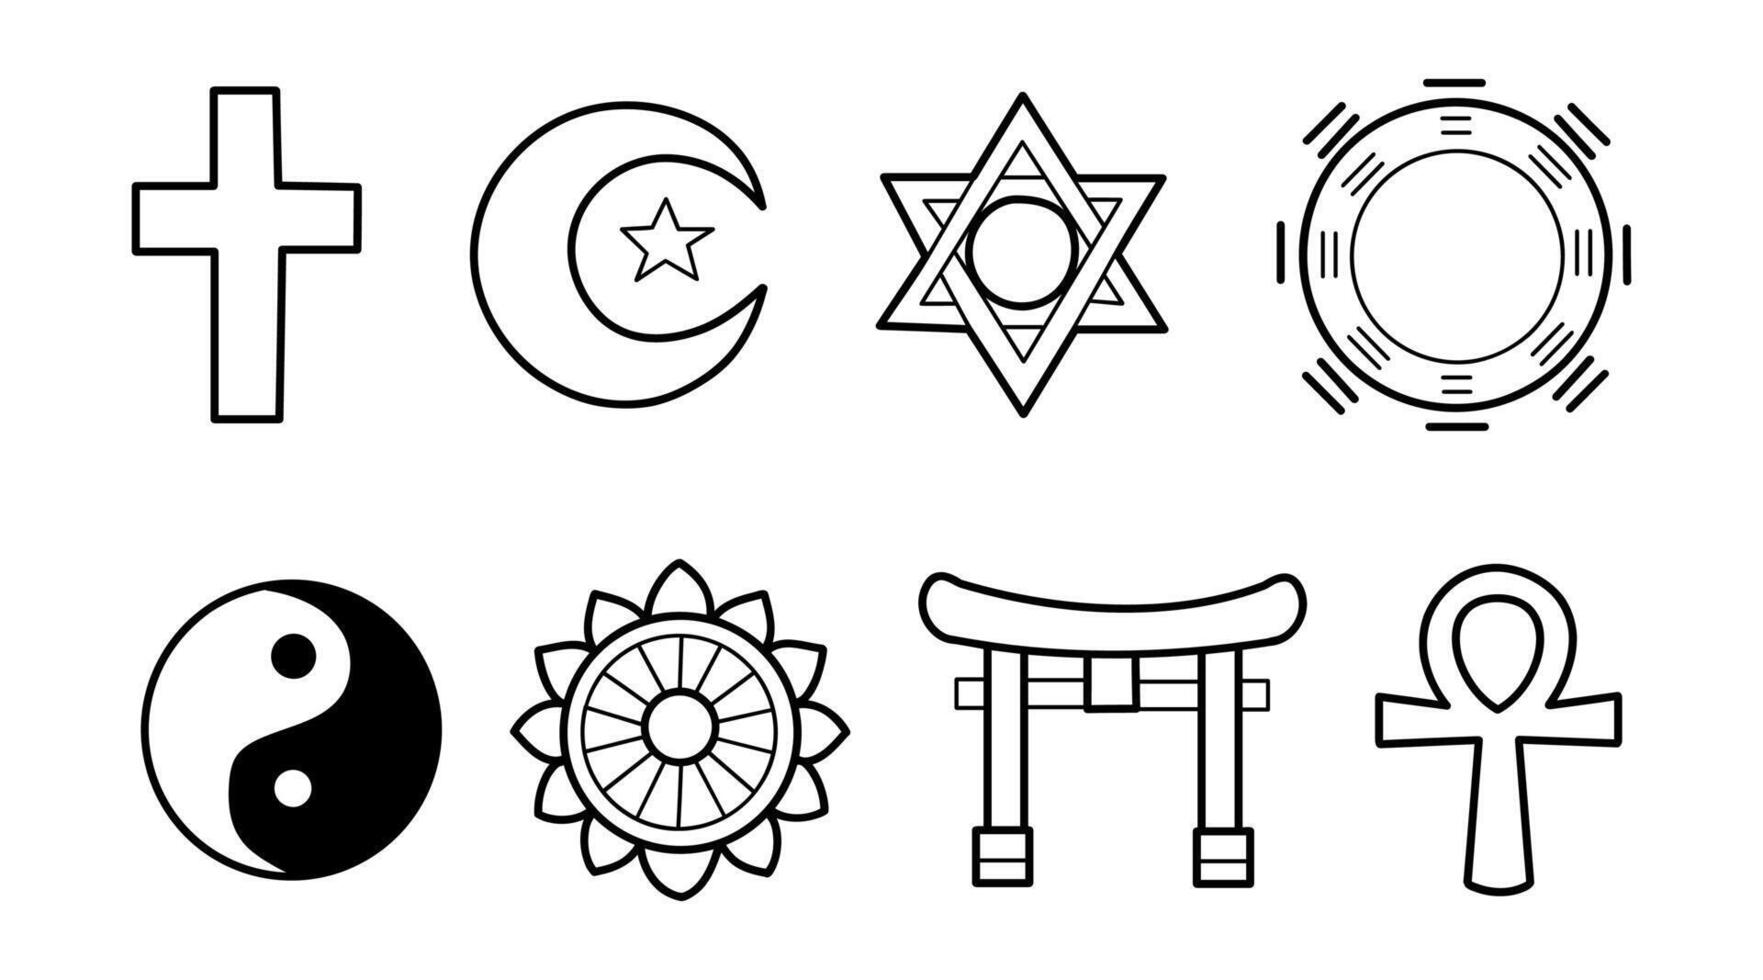 Religious and Spiritual symbols collection, universal icons and symbols of faith, monochromatic line art style, vector illustrations.